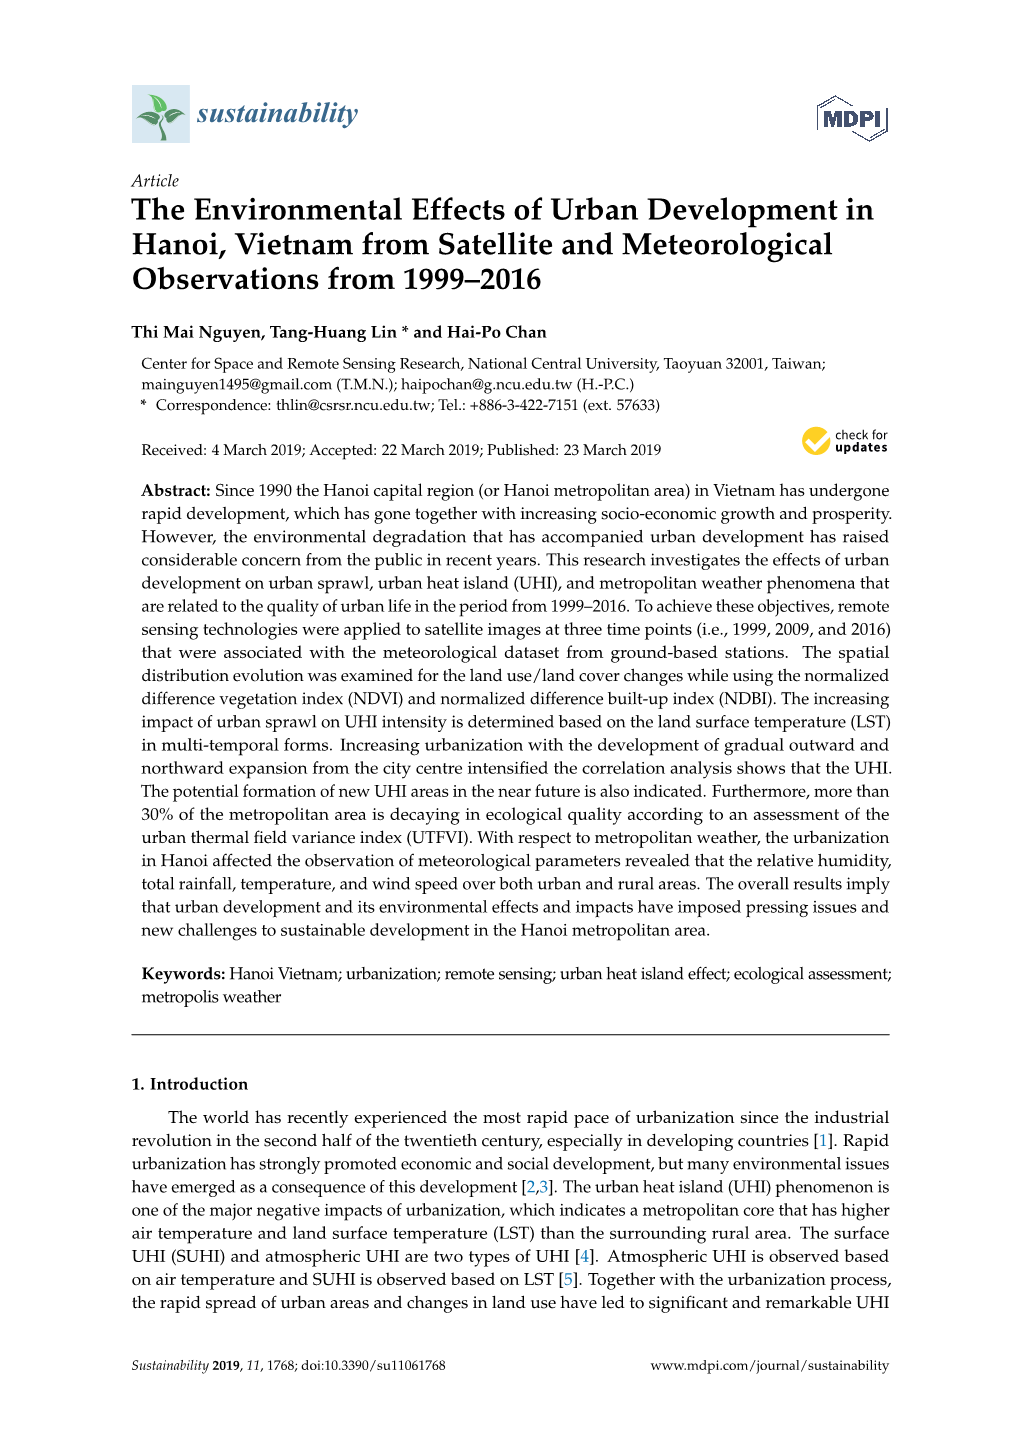 The Environmental Effects of Urban Development in Hanoi, Vietnam from Satellite and Meteorological Observations from 1999–2016